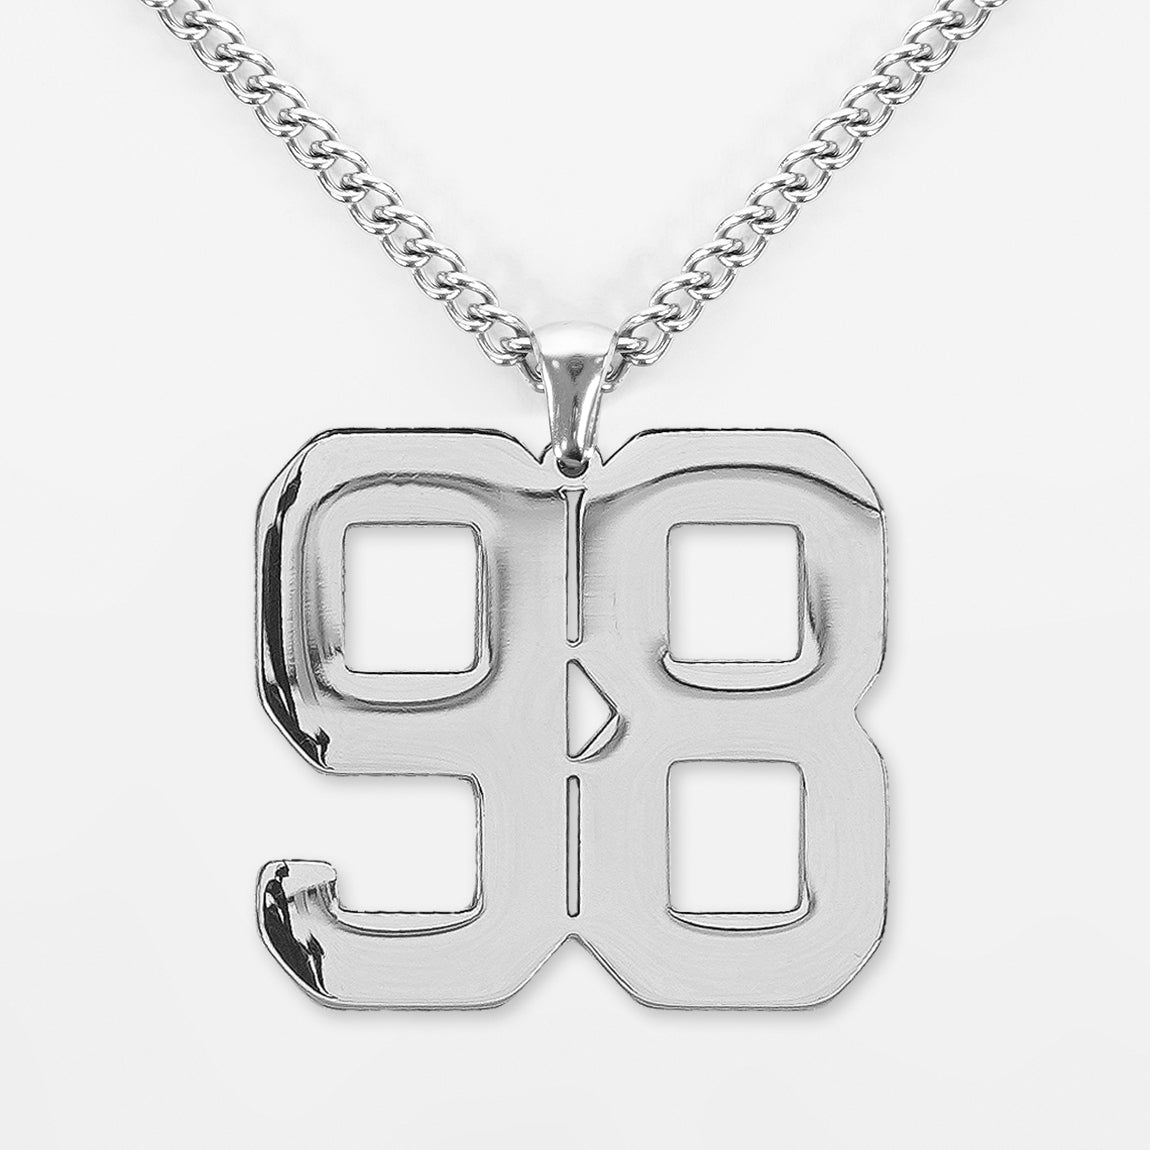 98 Number Pendant with Chain Necklace - Stainless Steel